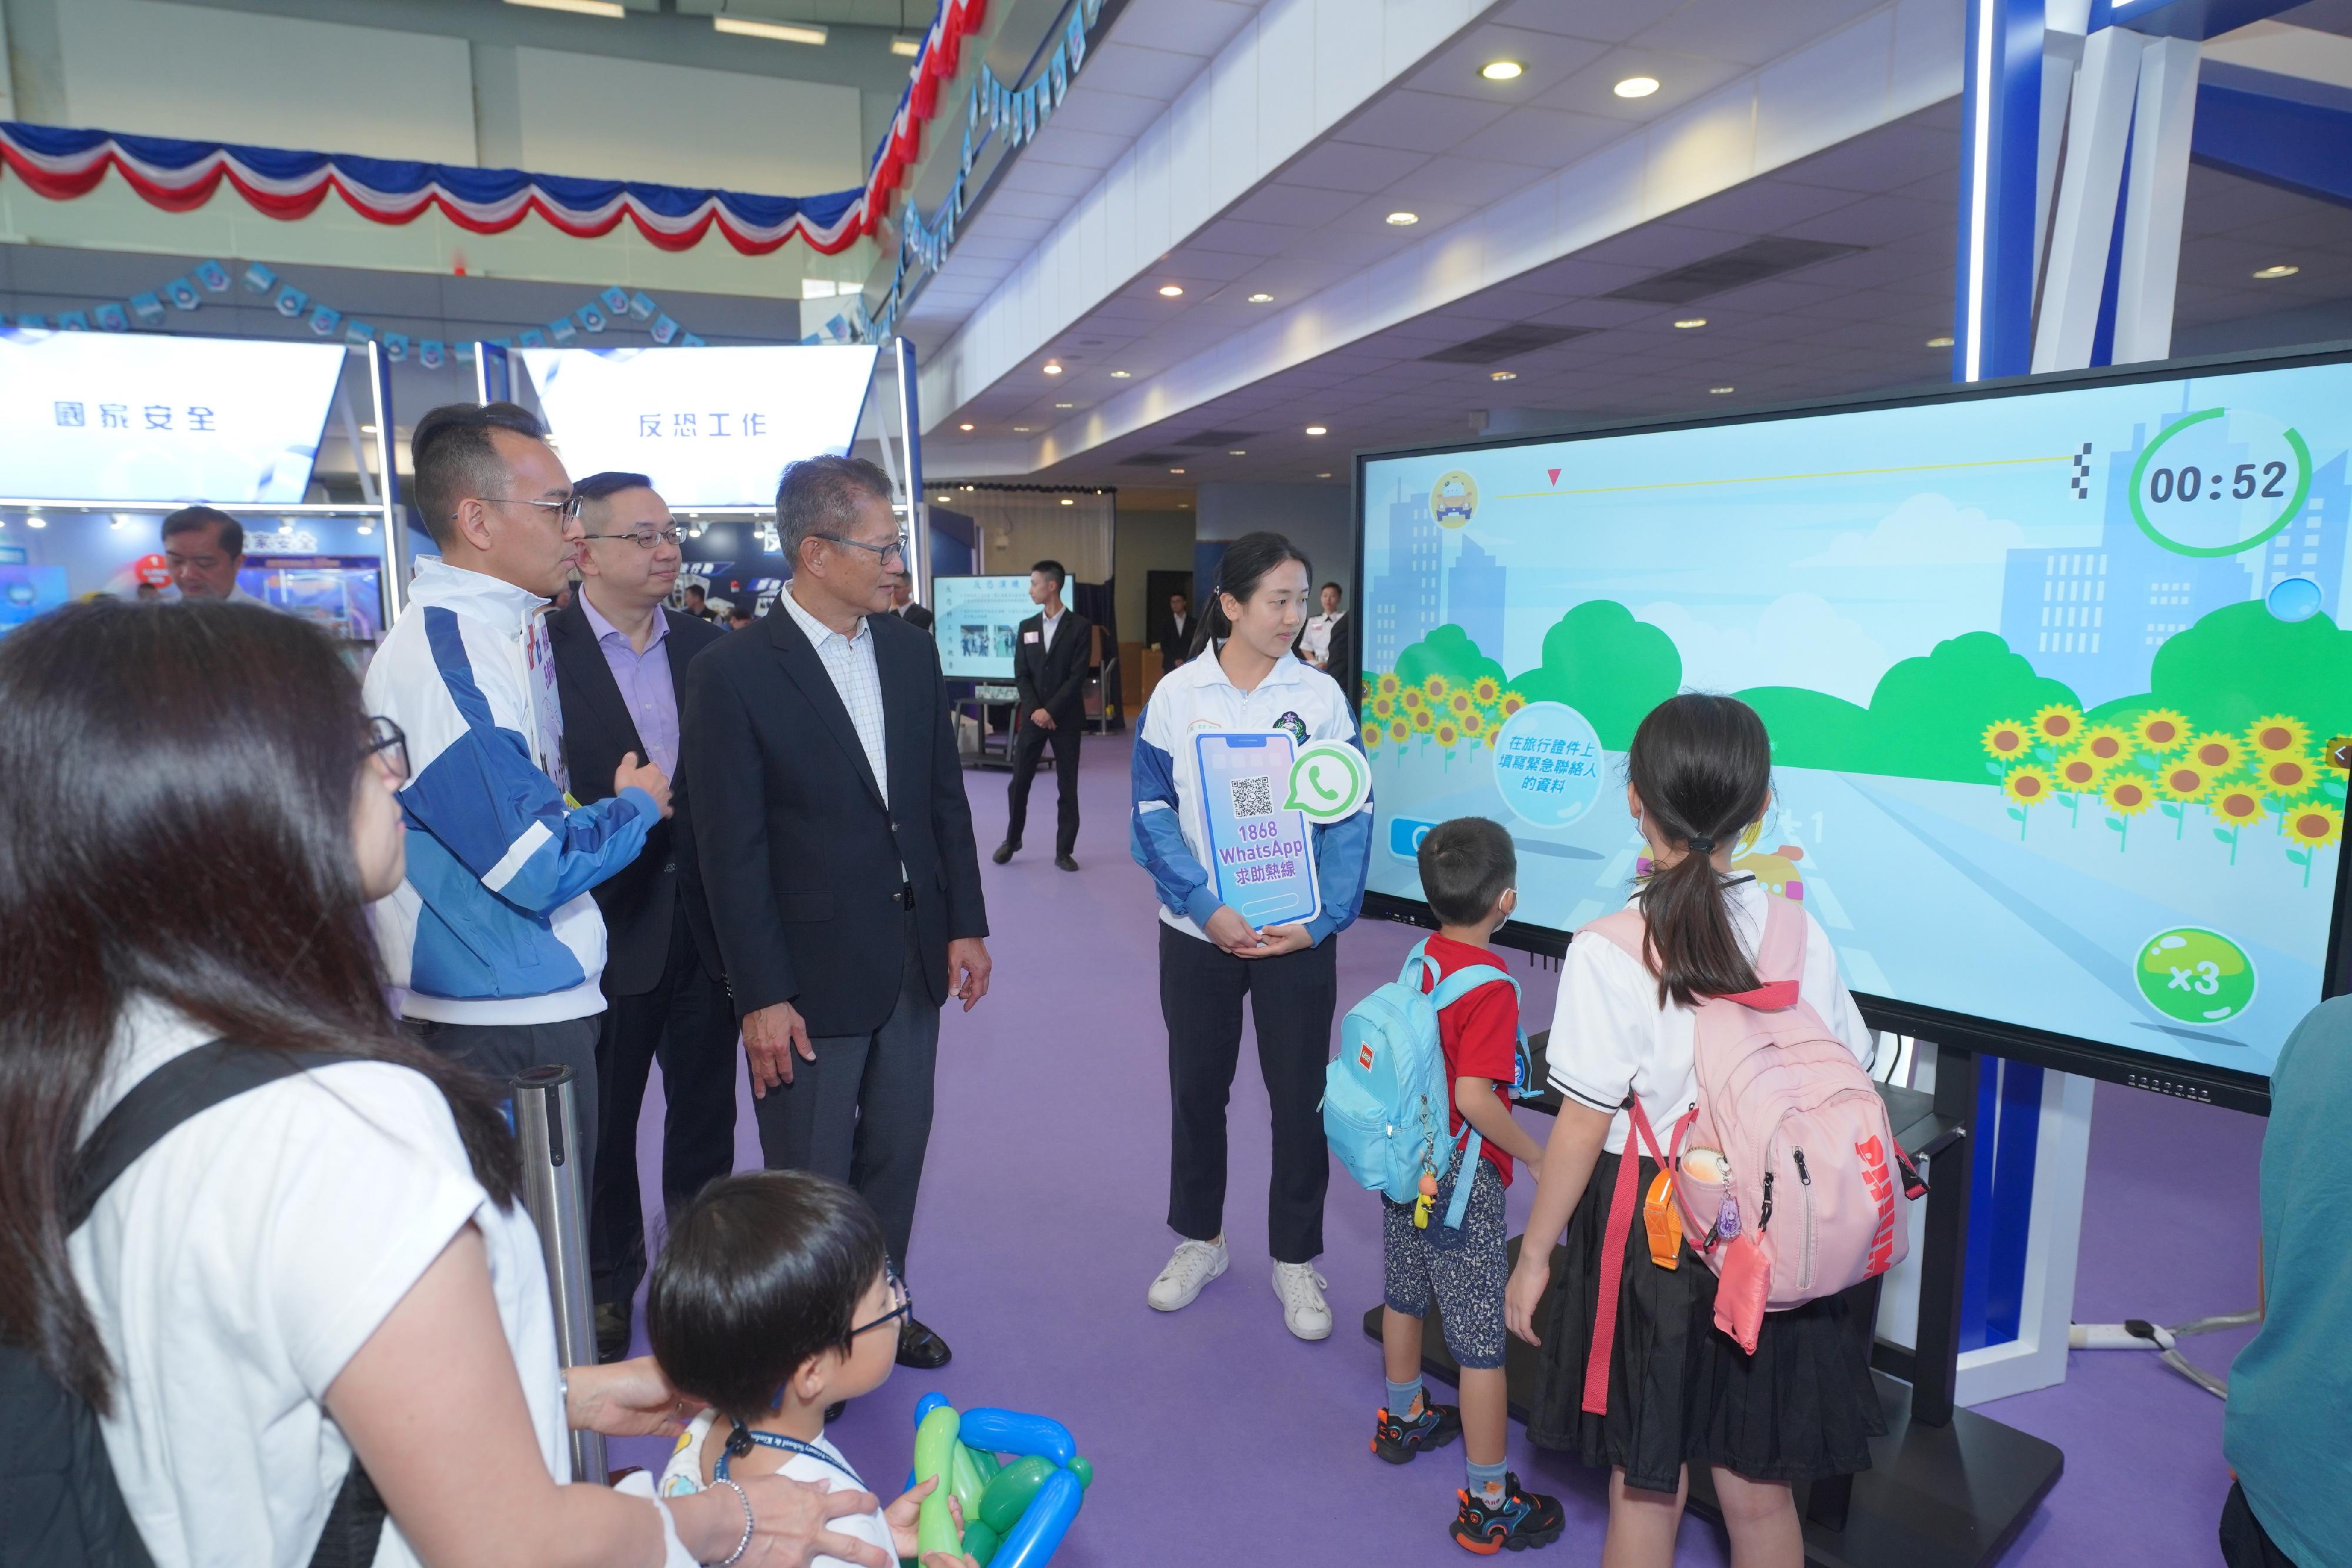 To support the National Security Education Day, the Immigration Service Institute of Training and Development held an open day today (April 13). Photo shows the Financial Secretary, Mr Paul Chan (second right), accompanied by the Director of Immigration, Mr Benson Kwok (third right), visiting an exhibition booth.